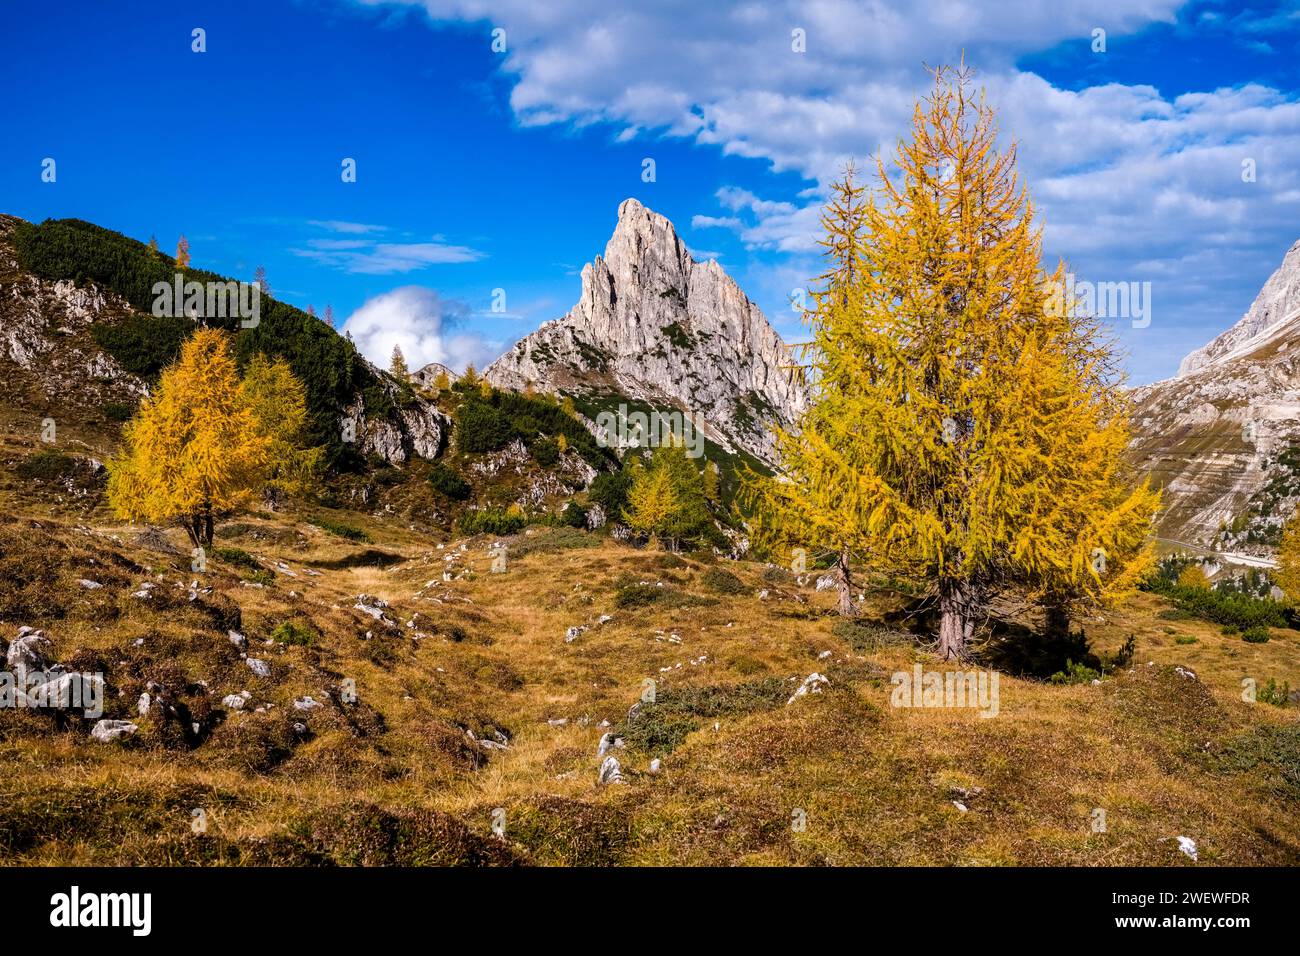 Colourful larch trees on the slopes around Falzarego Pass in autumn, the rock faces and summit of the mountain Hexenstein in the distance. Stock Photo